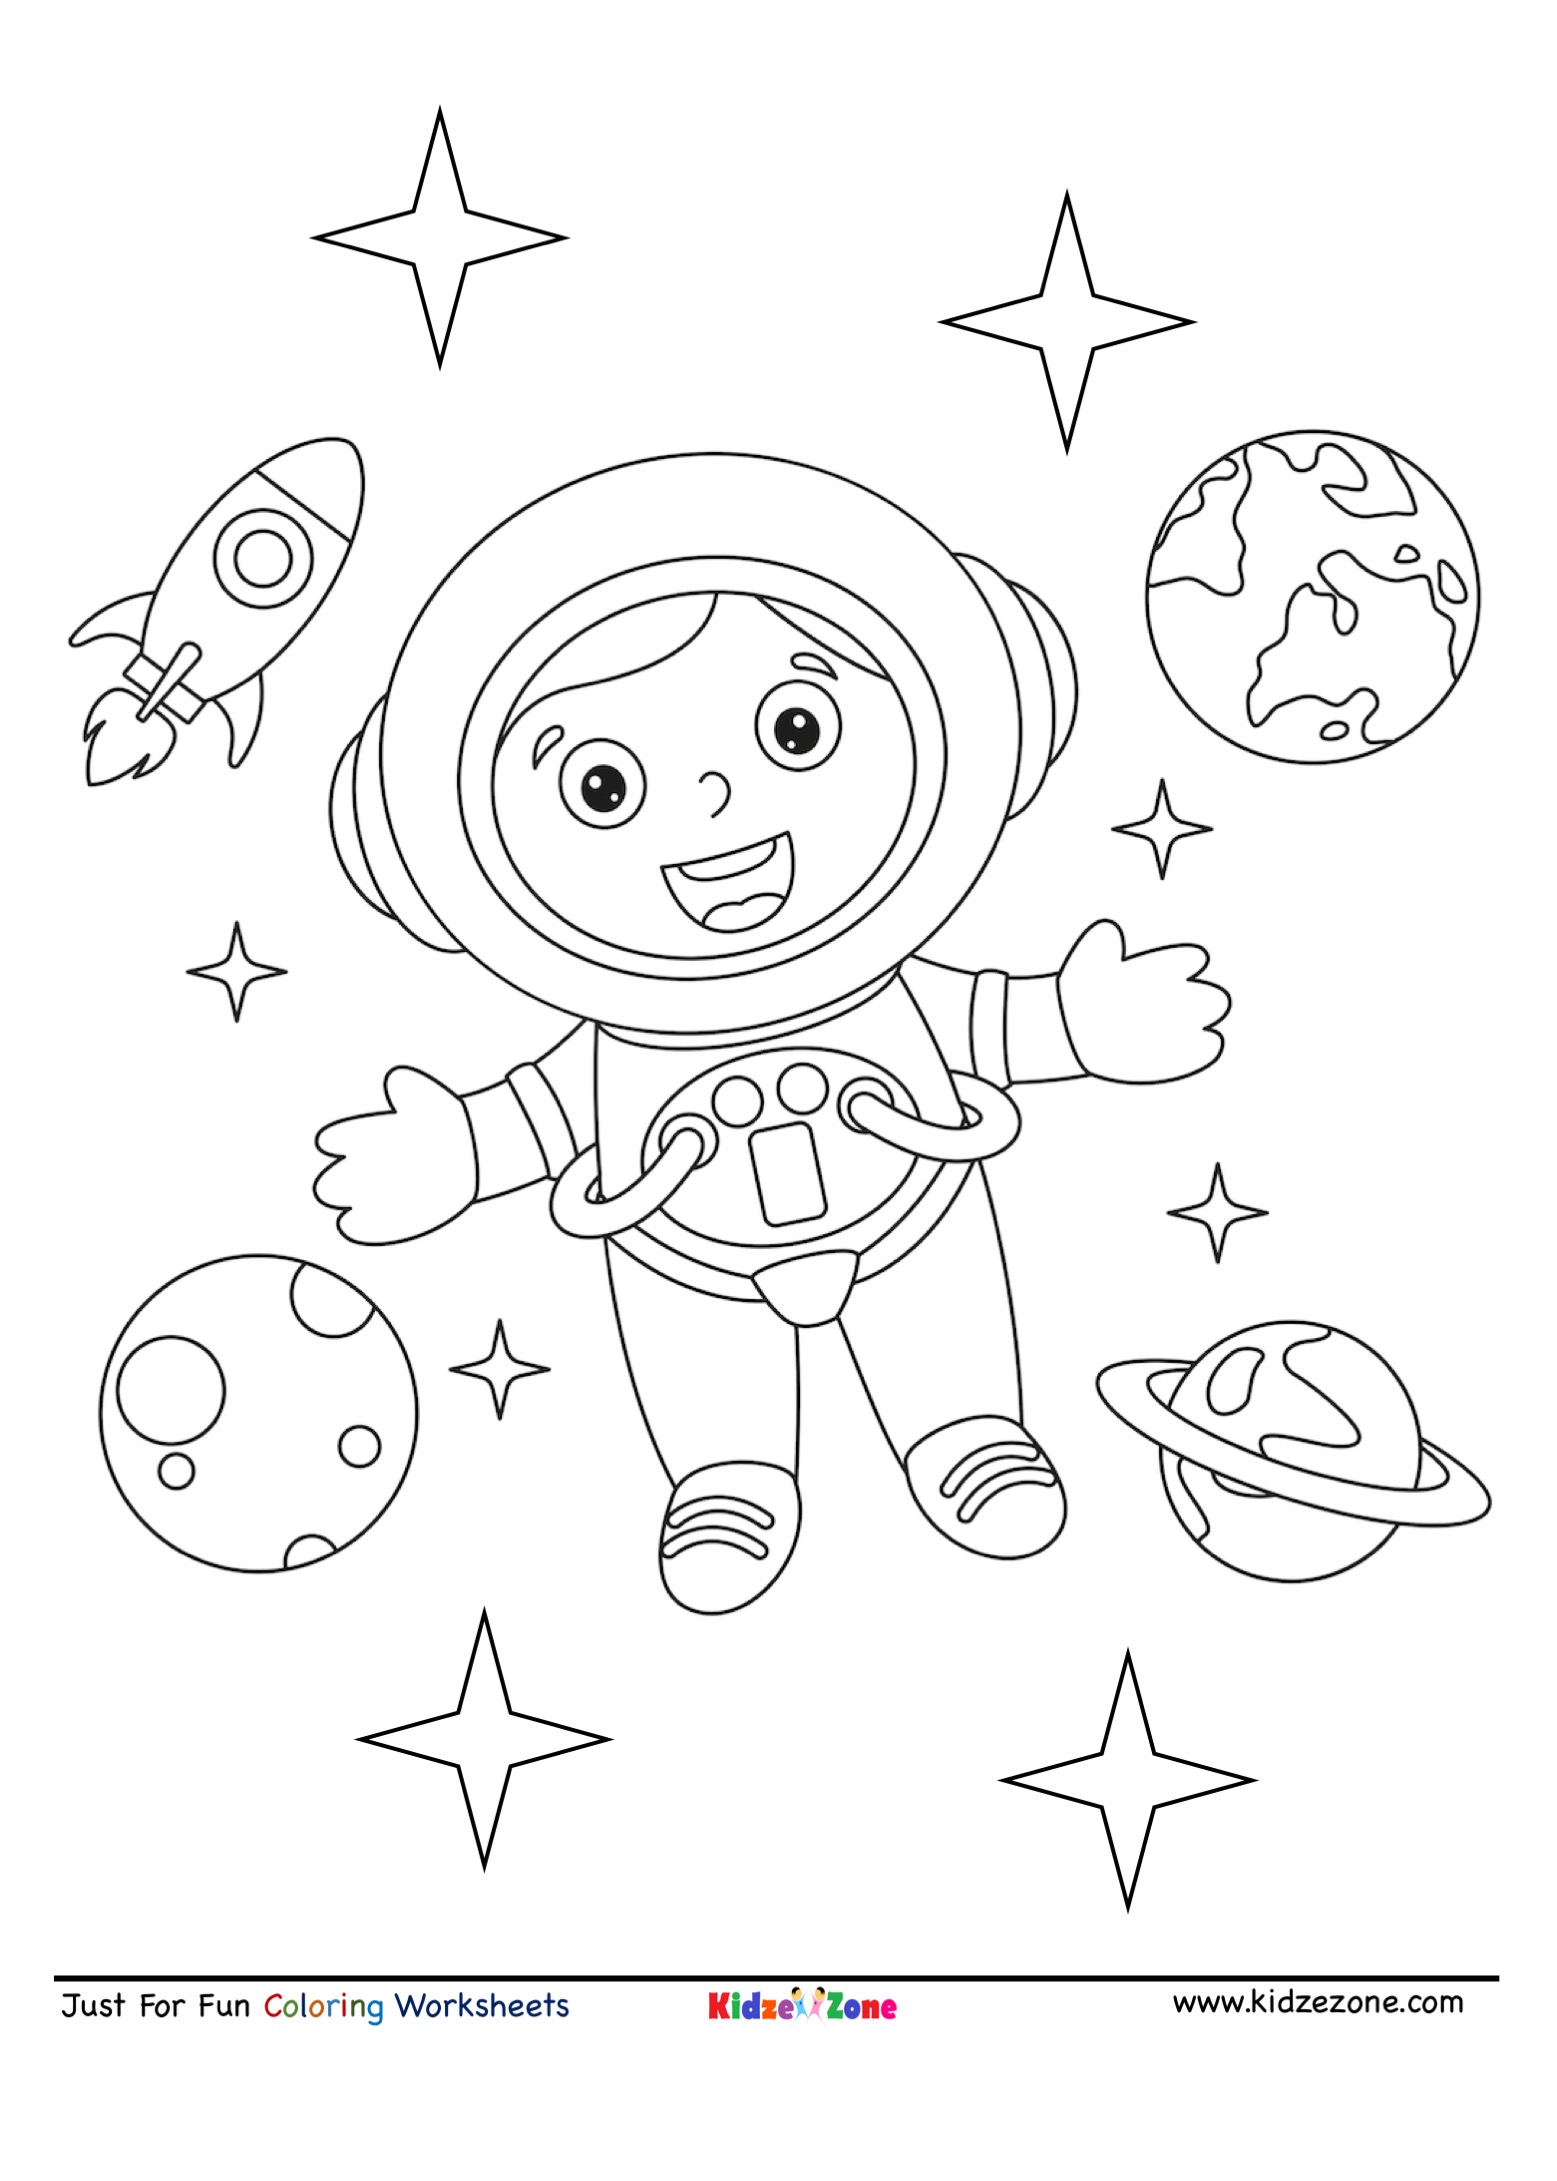 Astronaut in space coloring page